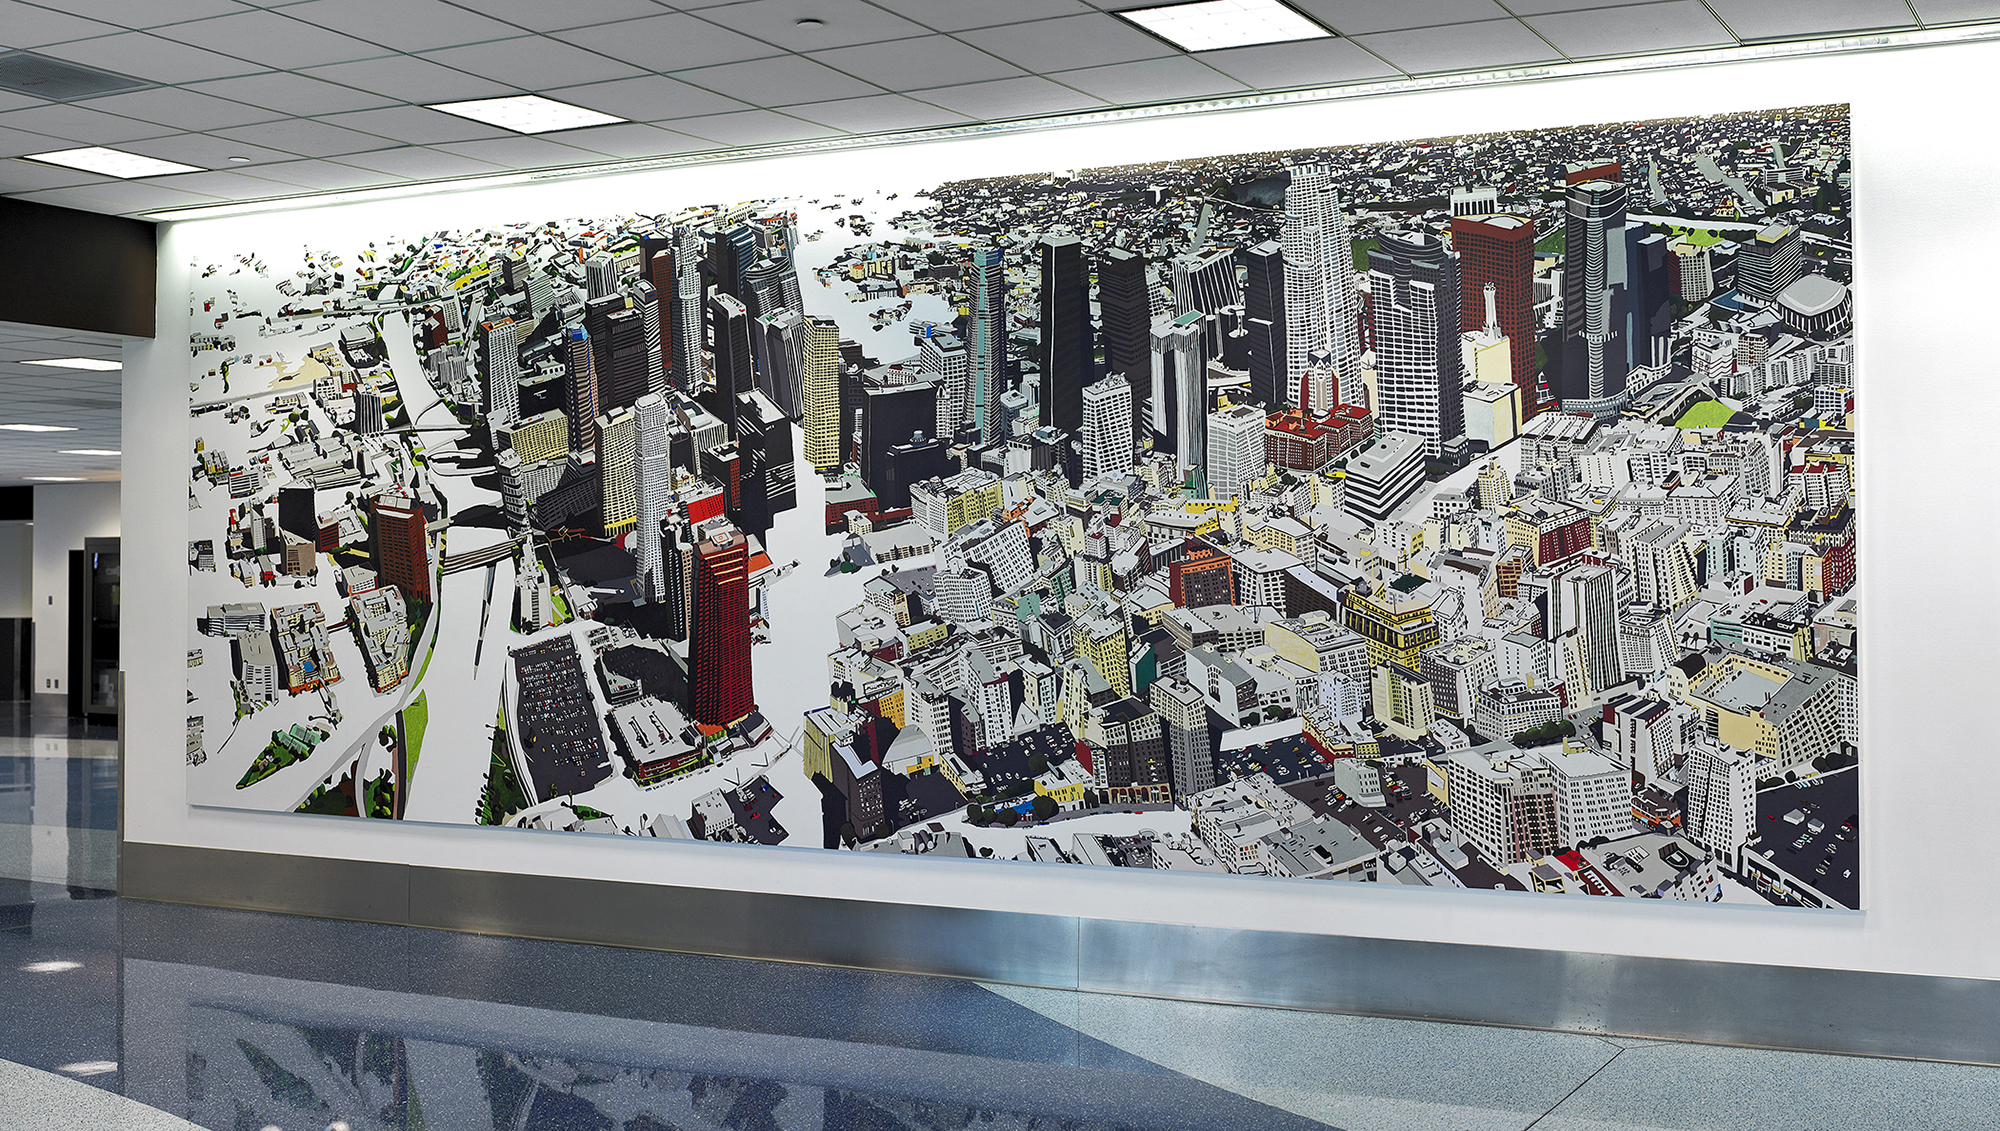 17. The Dream Décor of Oblivion, 2011, Vinyl mural constructed from existing drawings, 10’ x 60’ (detail)